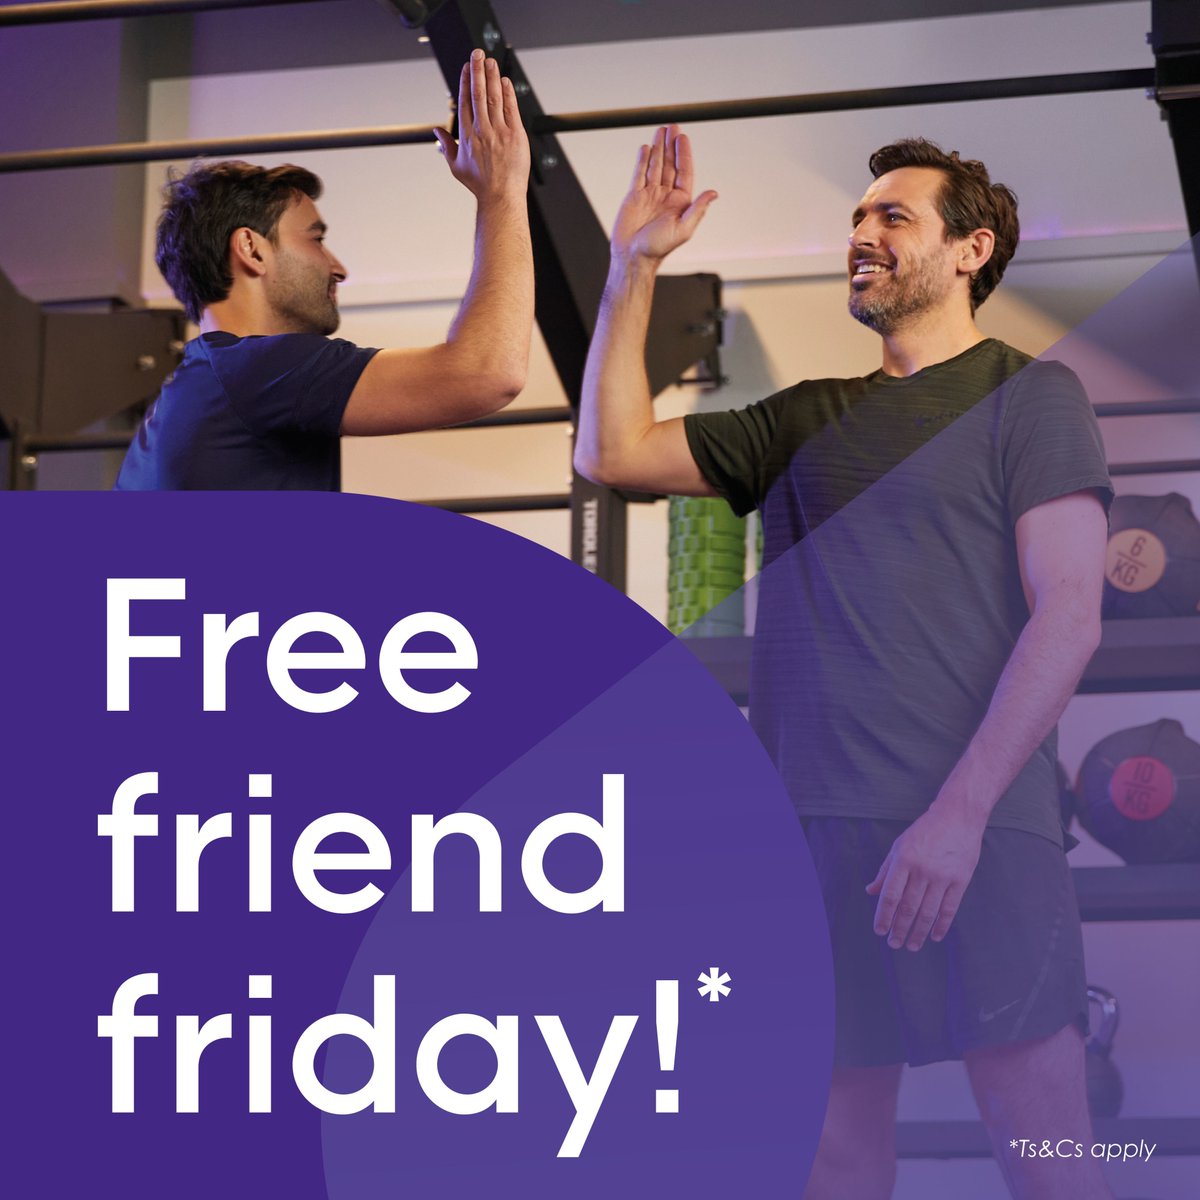 Starting this Friday 3rd May, Anytime Fitness Borehamwood are offering all members to bring a friend in for FREE!
Free Friend Friday will continue for the rest of May for all members.*

*Guests have to register upon entry and use the club during our staffed hours only. Limited...